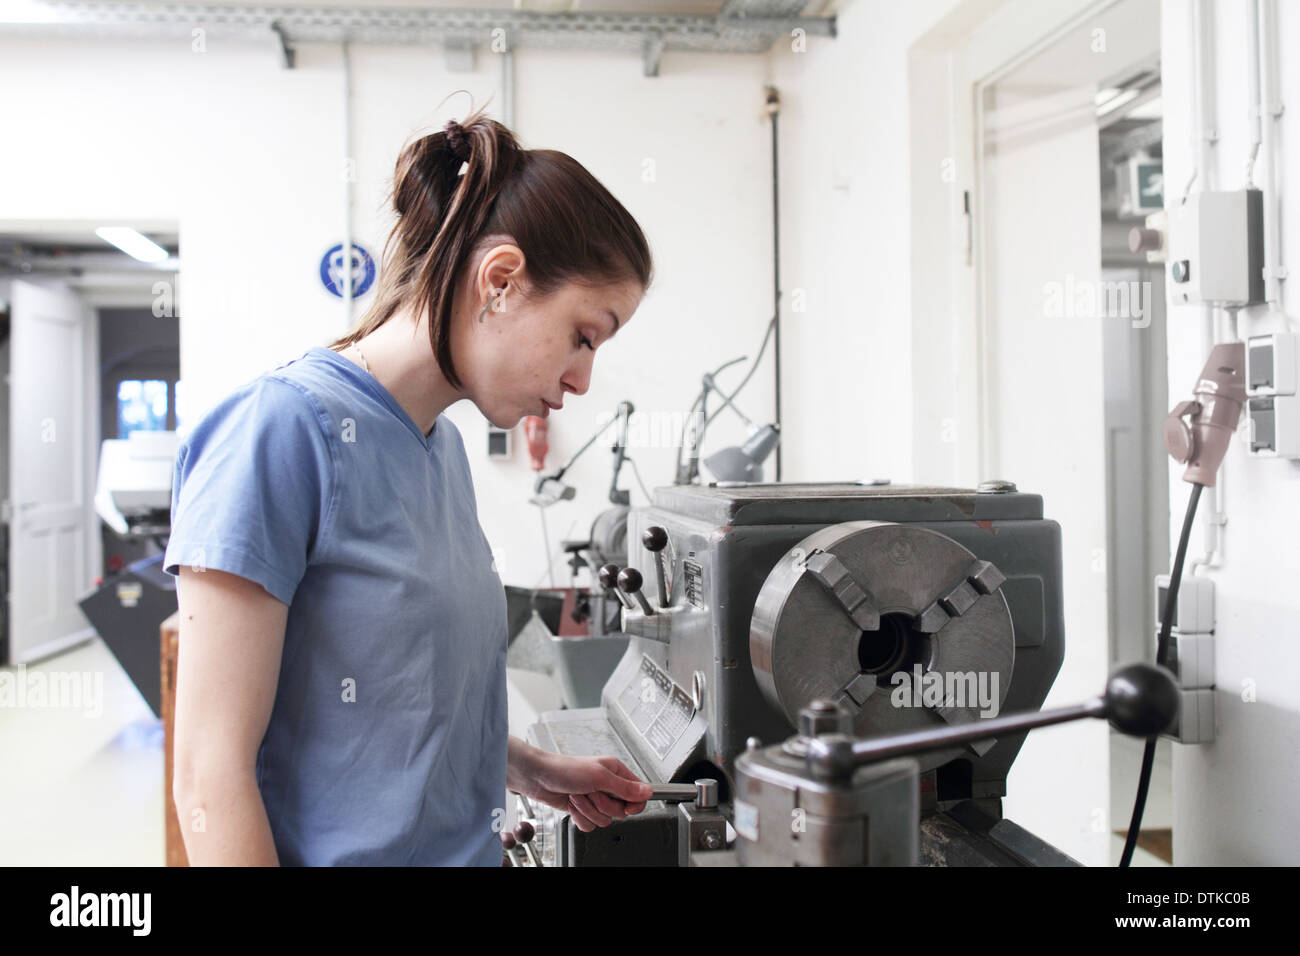 young woman working in a handcraft mechanic room Stock Photo